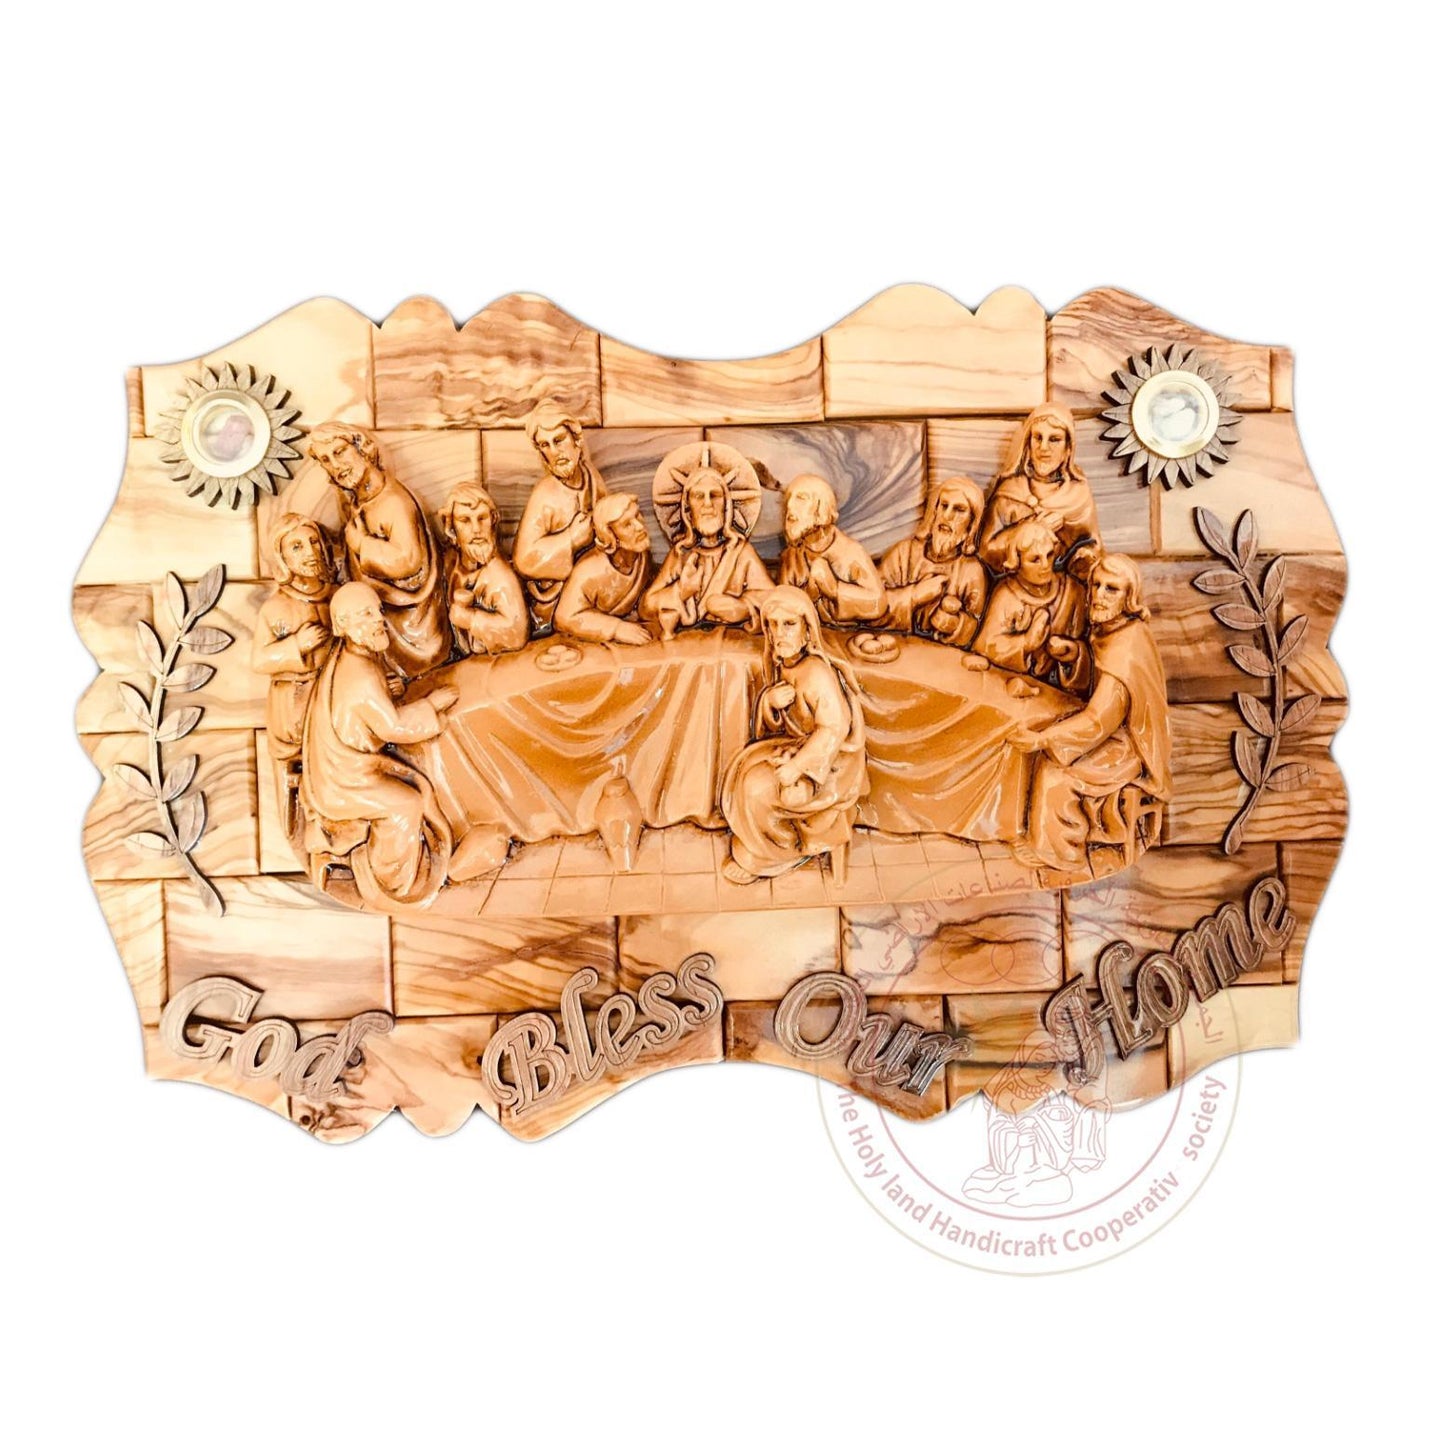 God Bless our Home' Plaque w/Last Supper & 2 Inlaid Incense - Olive Wood & Gypsum Relief